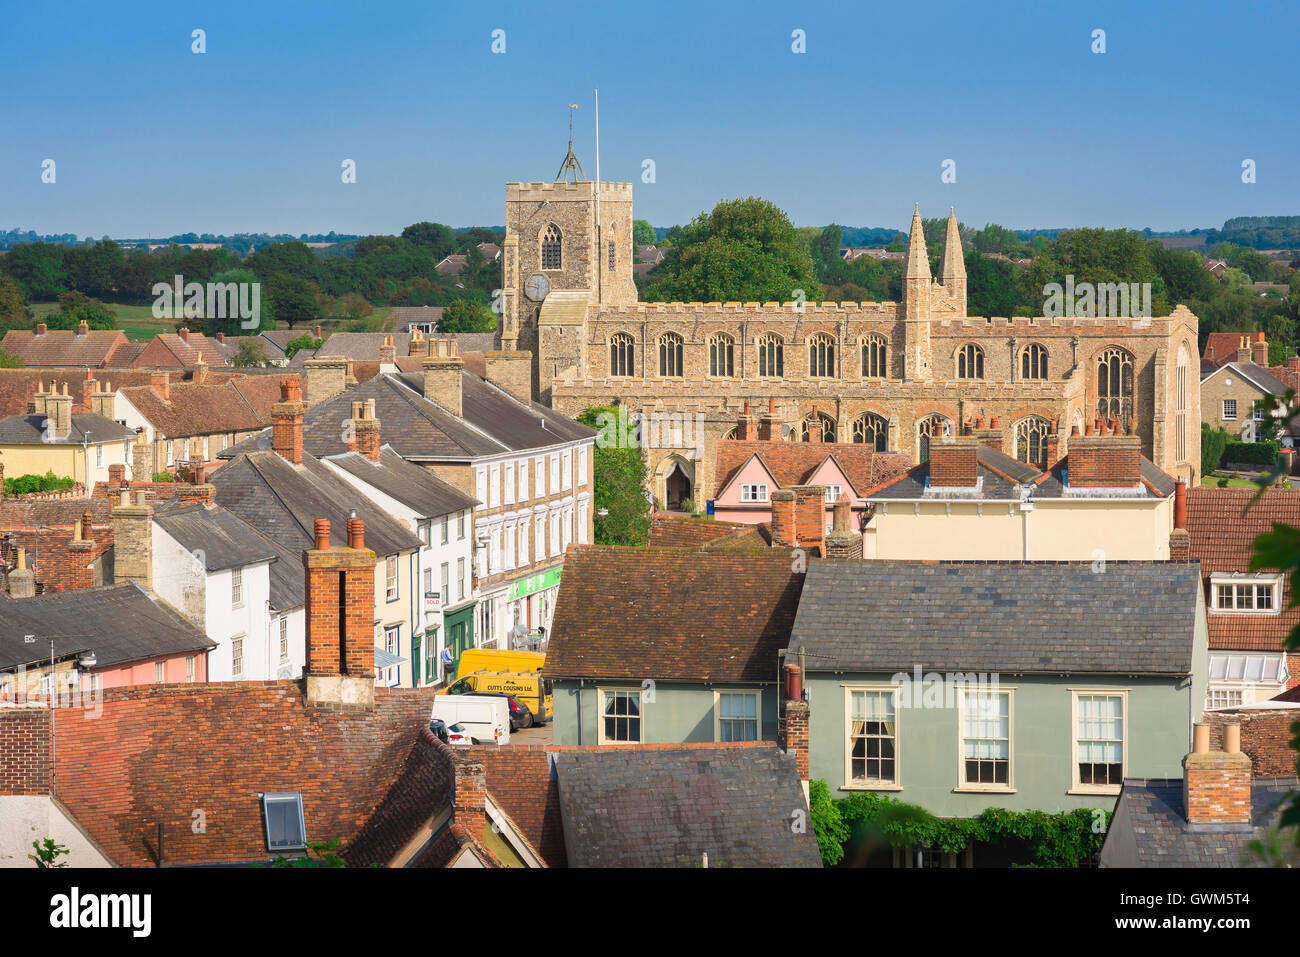 England village church, an aerial view of the village of Clare with its historic medieval church in Suffolk, England, UK. Stock Photo